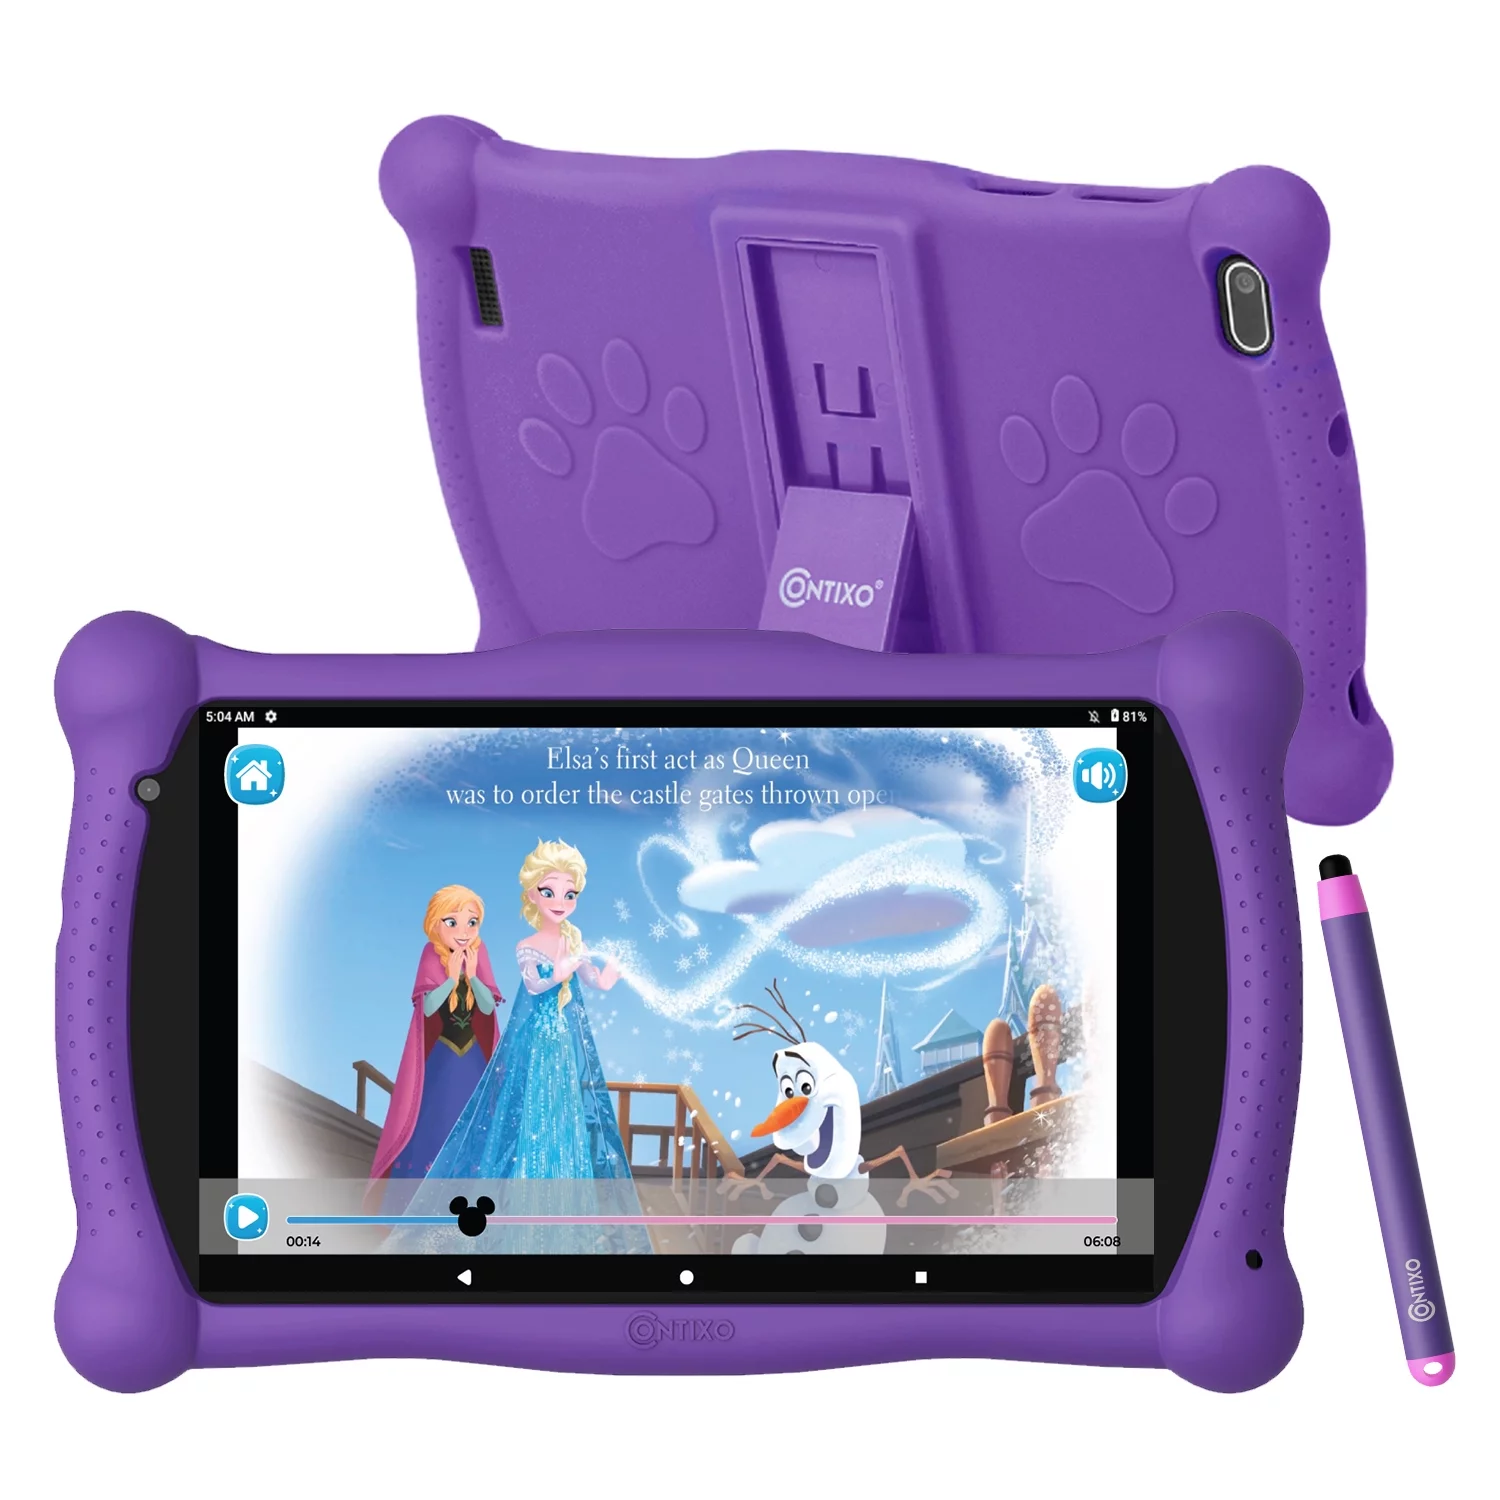 Kids Learning Tablet with Teacher Approved Apps (Save upto $150 Value), Contixo 7-inch IPS HD, WiFi, Android, 2GB RAM 16GB ROM, Protective Case with Kickstand and Stylus, Age 3-7, V10-Purple